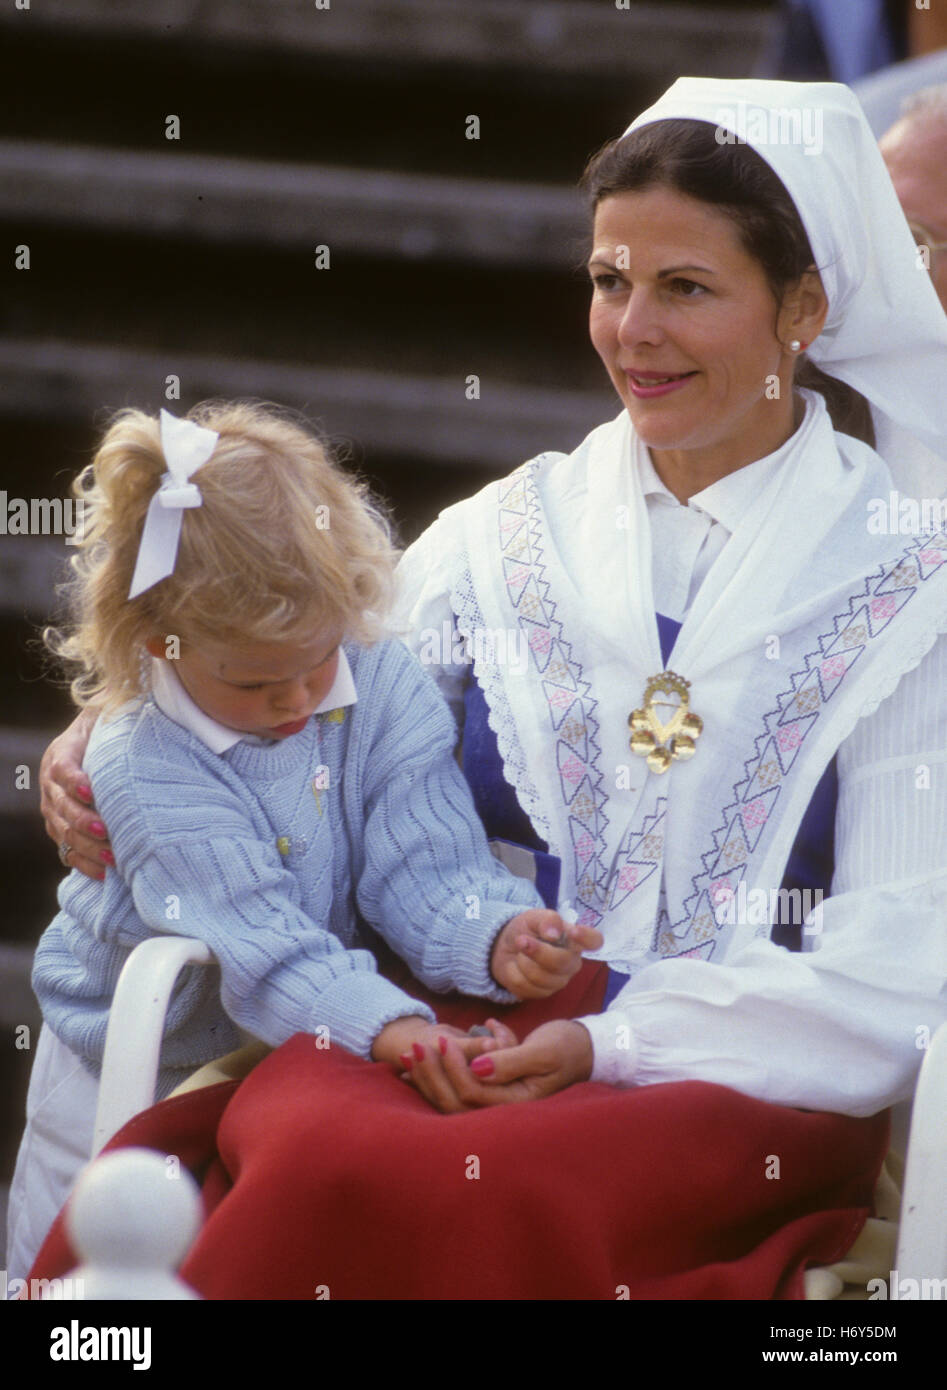 queen-silvia-in-costume-with-princess-madeleine-to-celebrate-crown-H6Y5DM.jpg